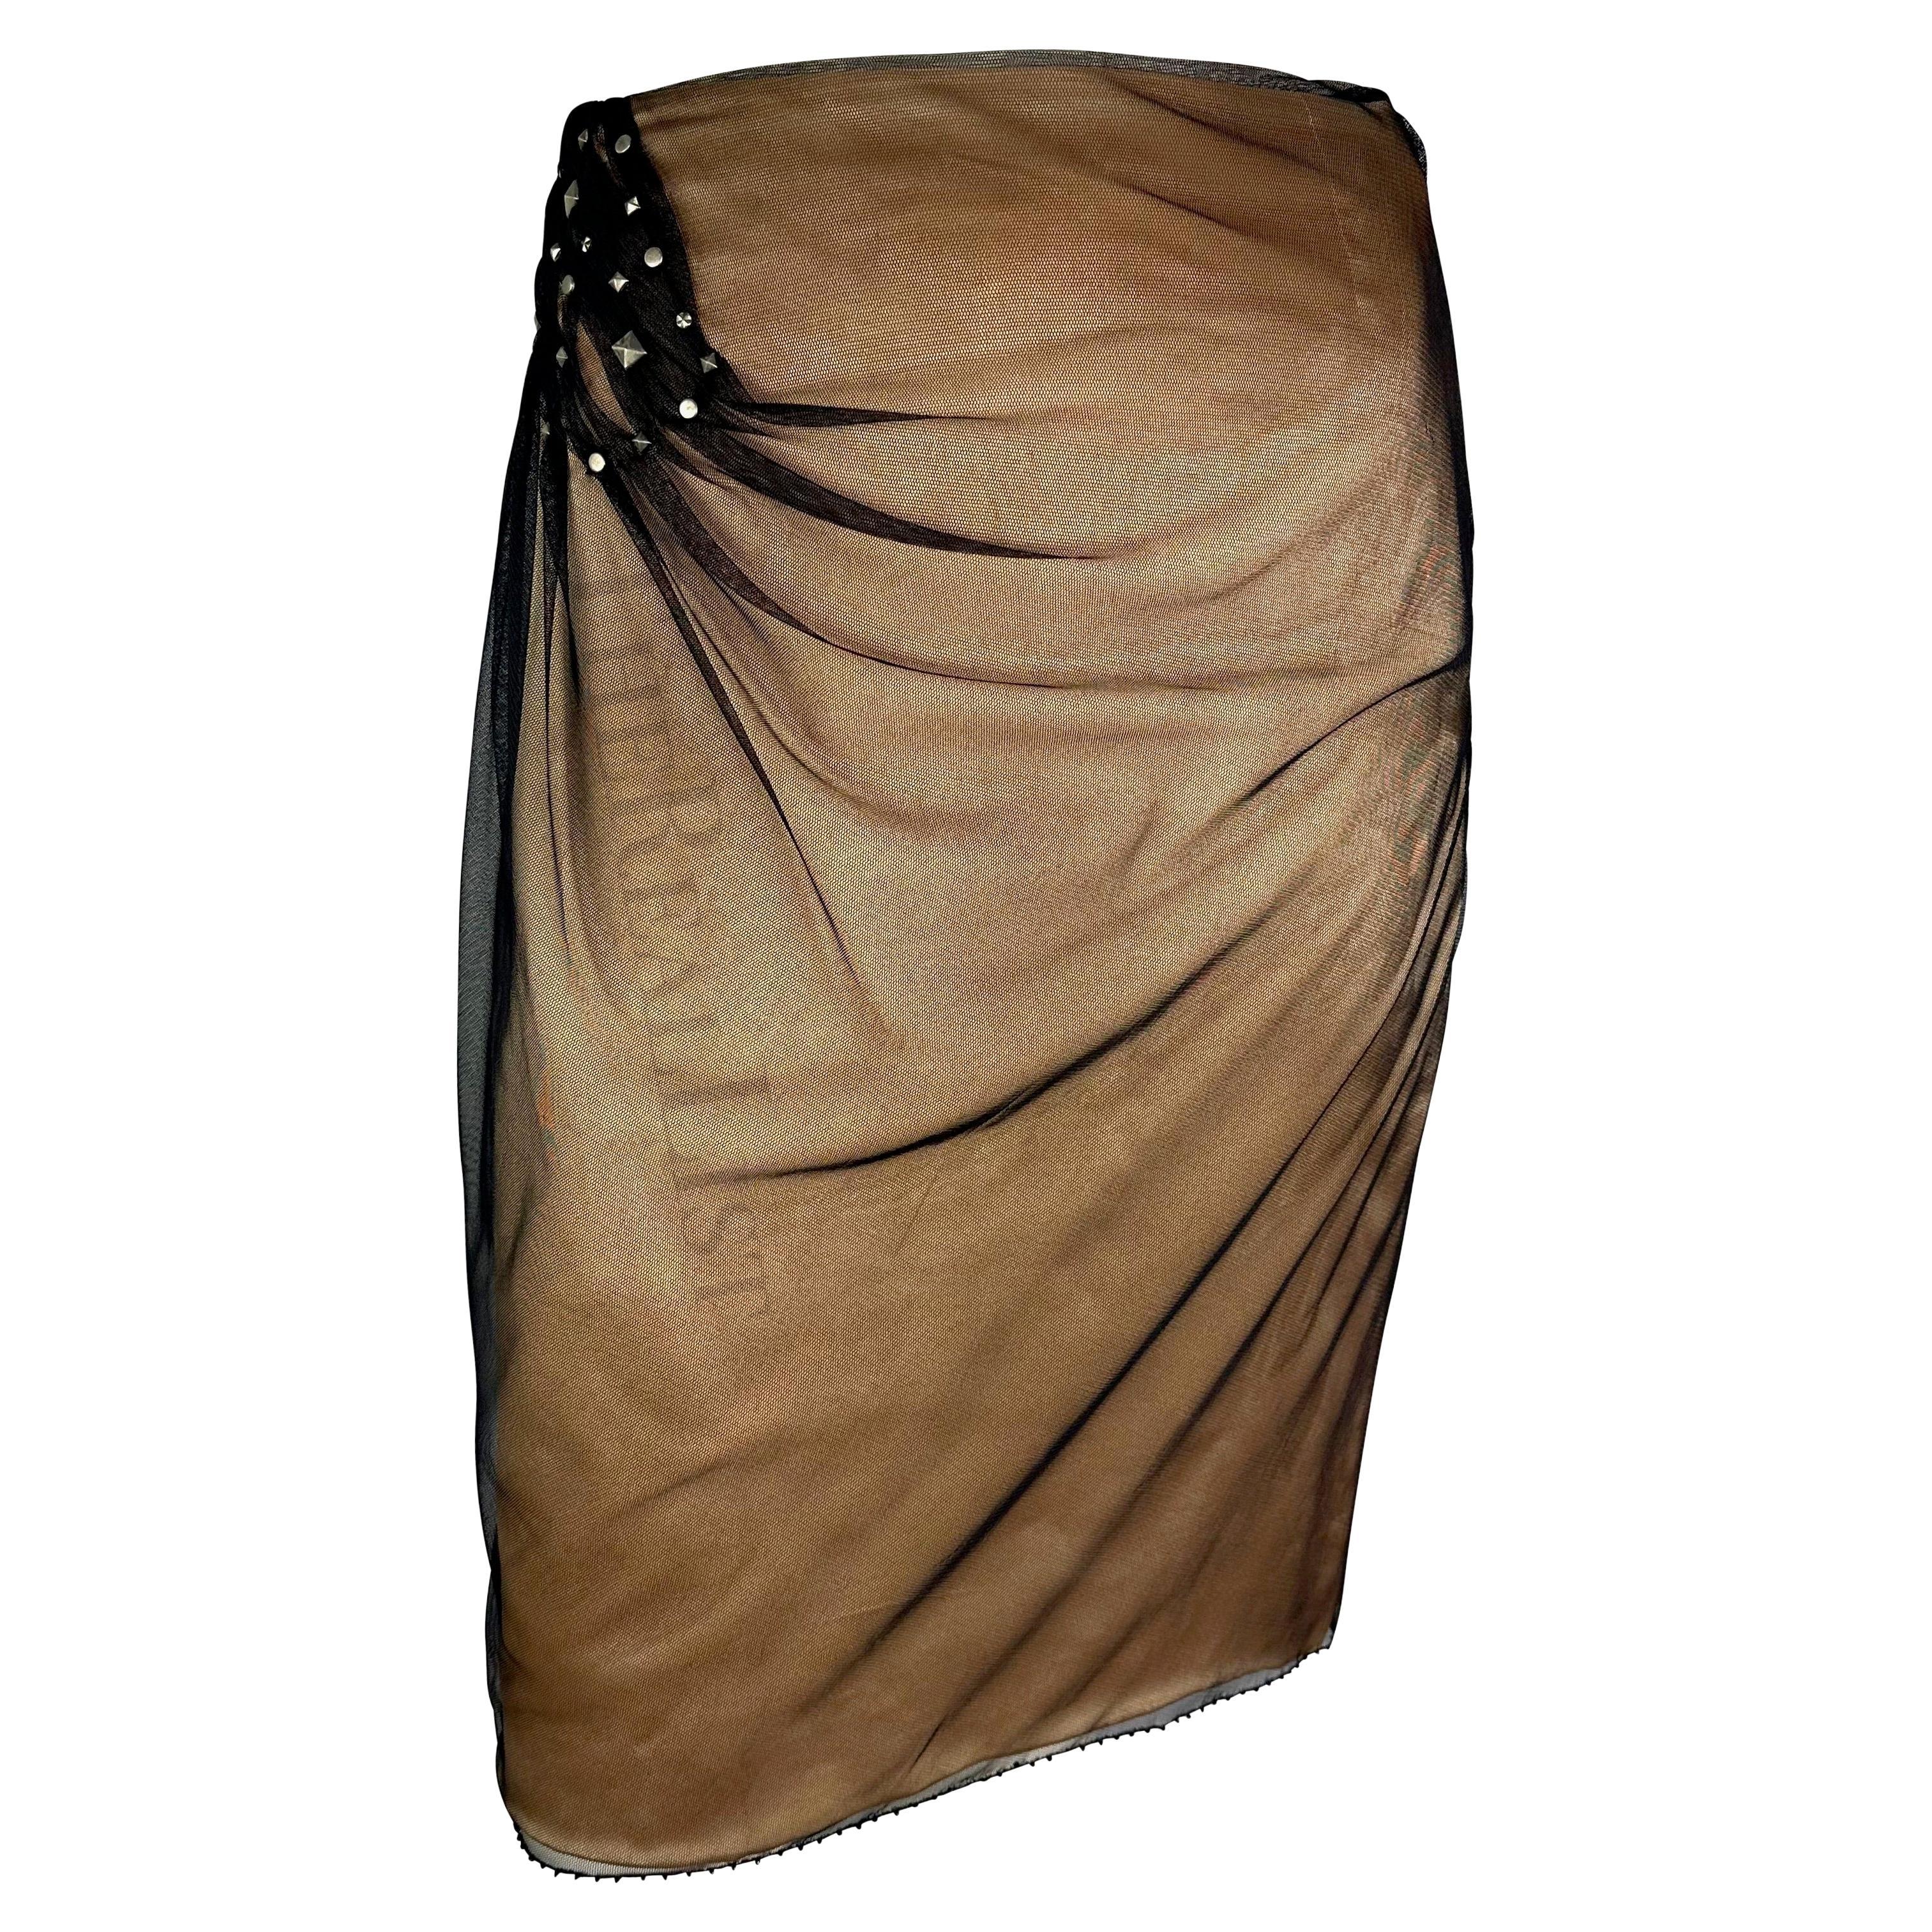 F/W 1998 Gianni Versace by Donatella Runway Ad Beige Tulle Studded Skirt For Sale 6